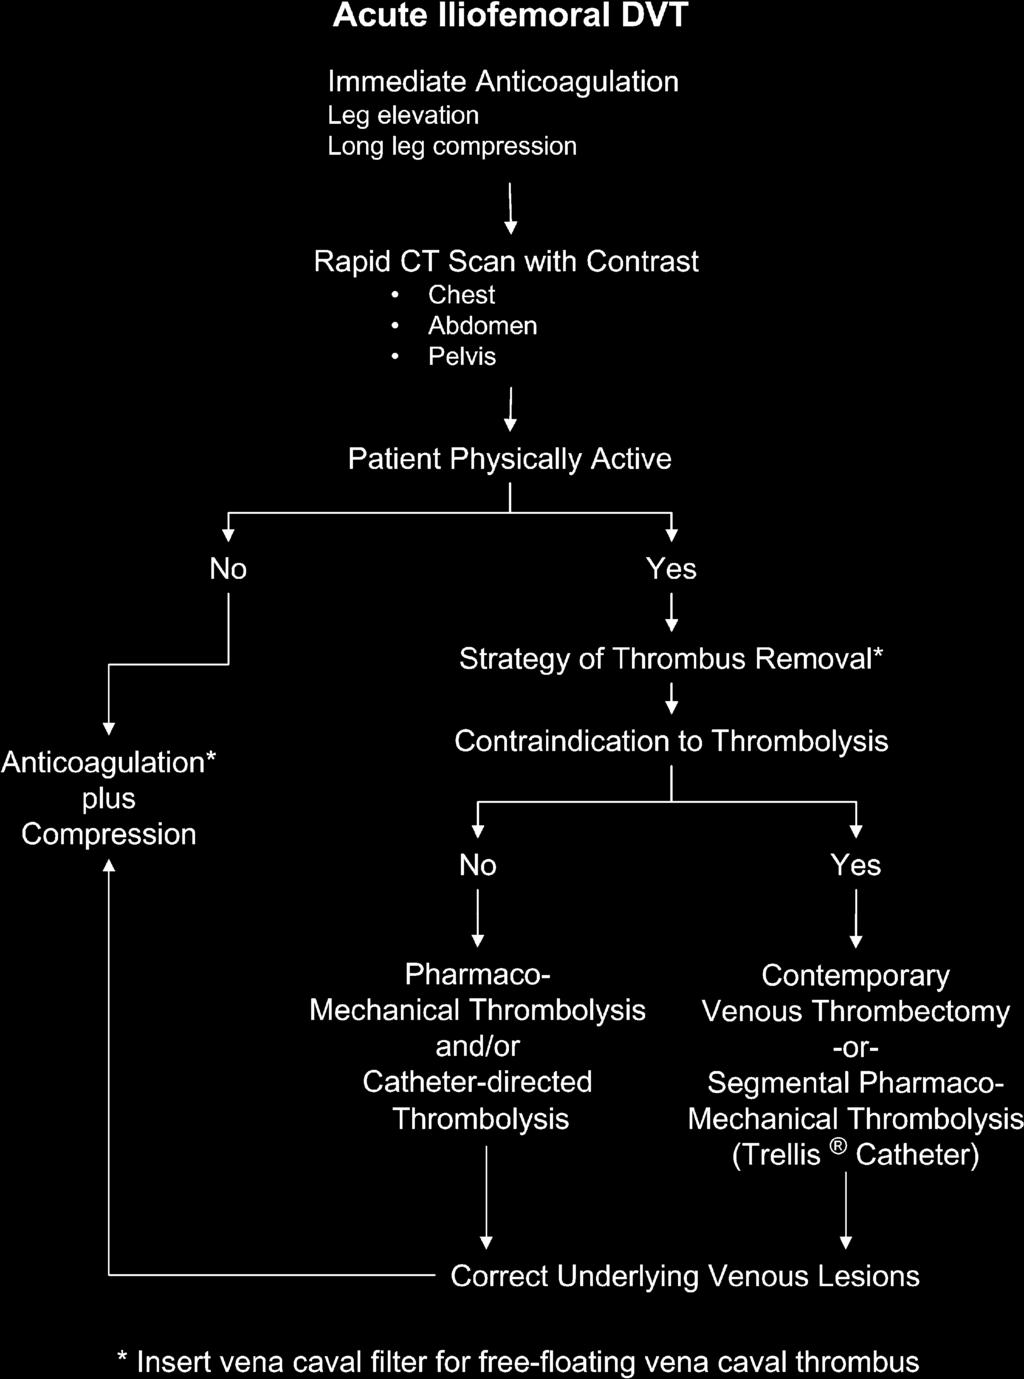 358 A. J. Comerota and D. Paolini Fig. 3. Algorithm illustrating the general treatment strategy for patients with iliofemoral DVT.